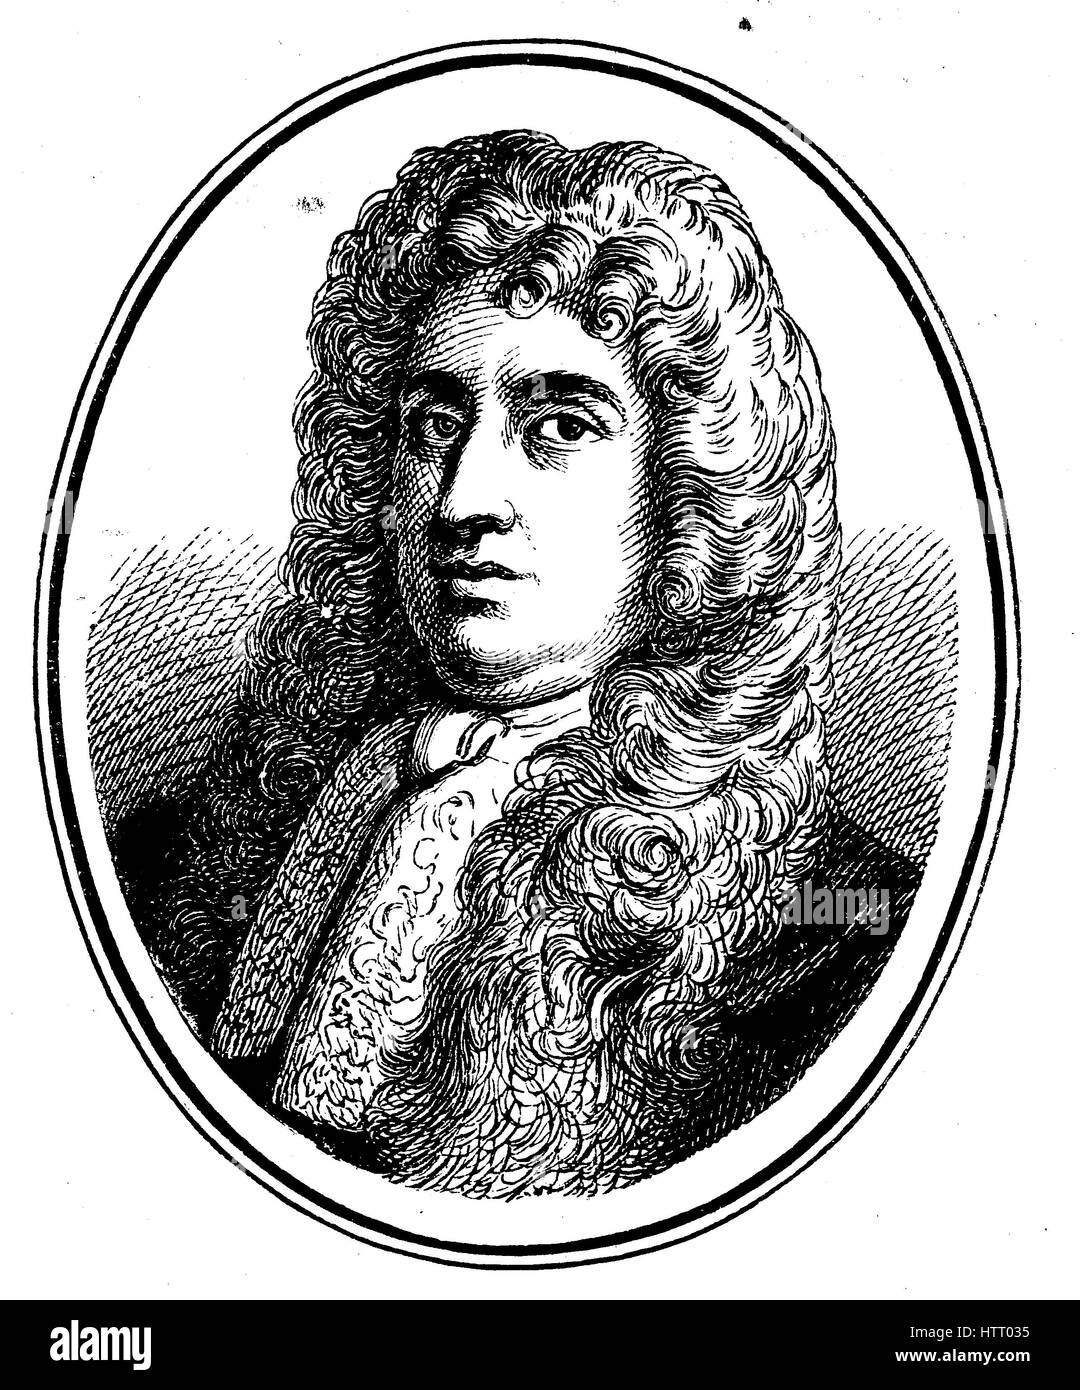 William Russell, Lord Russell, 29 September 1639 - 21 July 1683, was an English politician. Lord William Russell war ein englischer Politiker., reproduction of a woodcut from the year 1880, digital improved Stock Photo